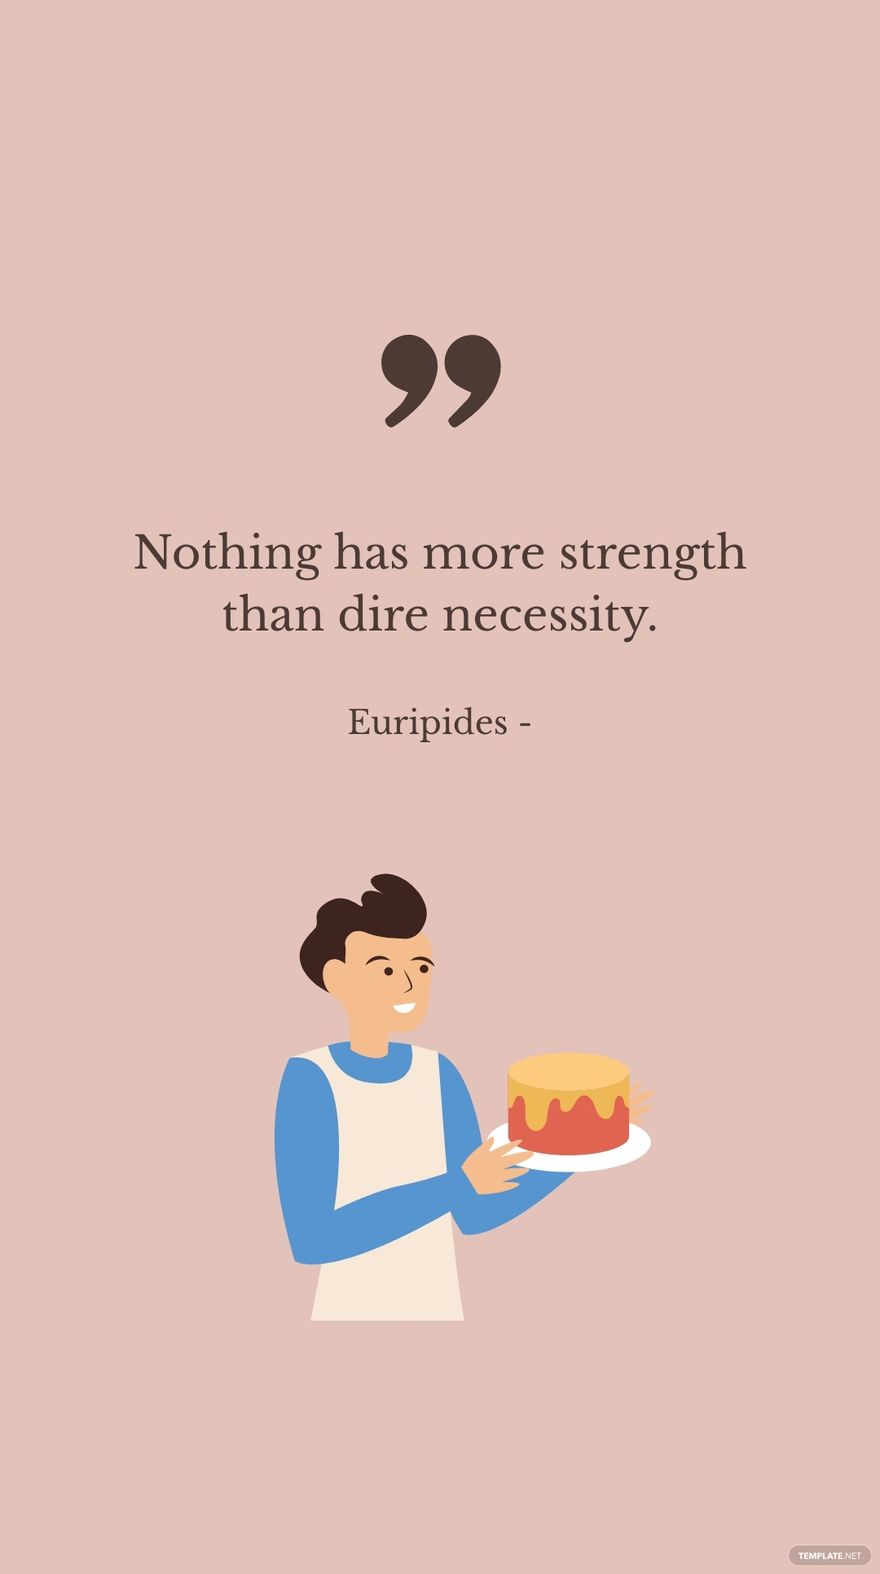 Euripides - Nothing has more strength than dire necessity.